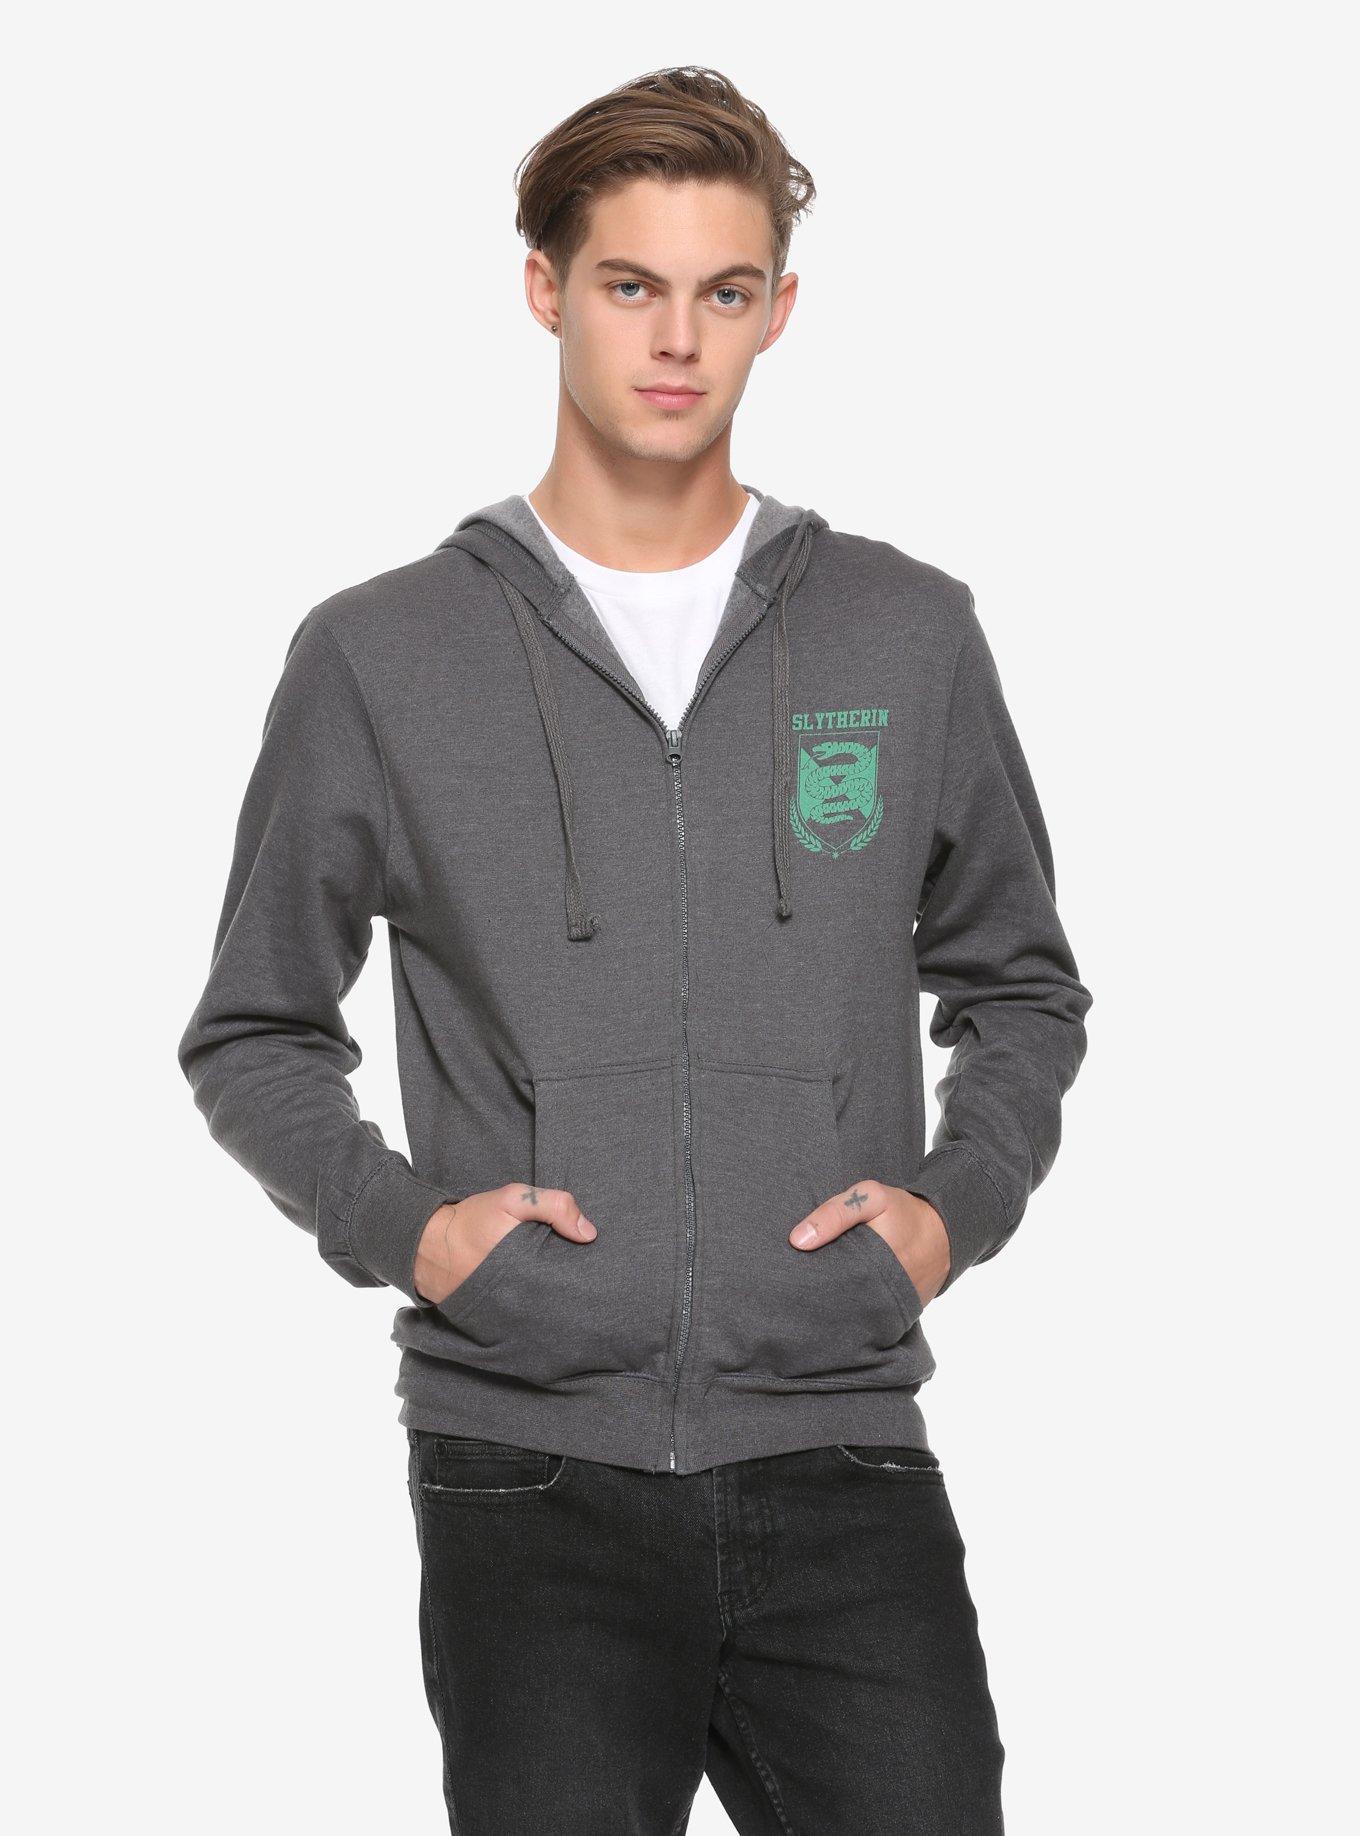 Harry Potter Slytherin Quidditch Team Zipper Hoodie | Hot Topic